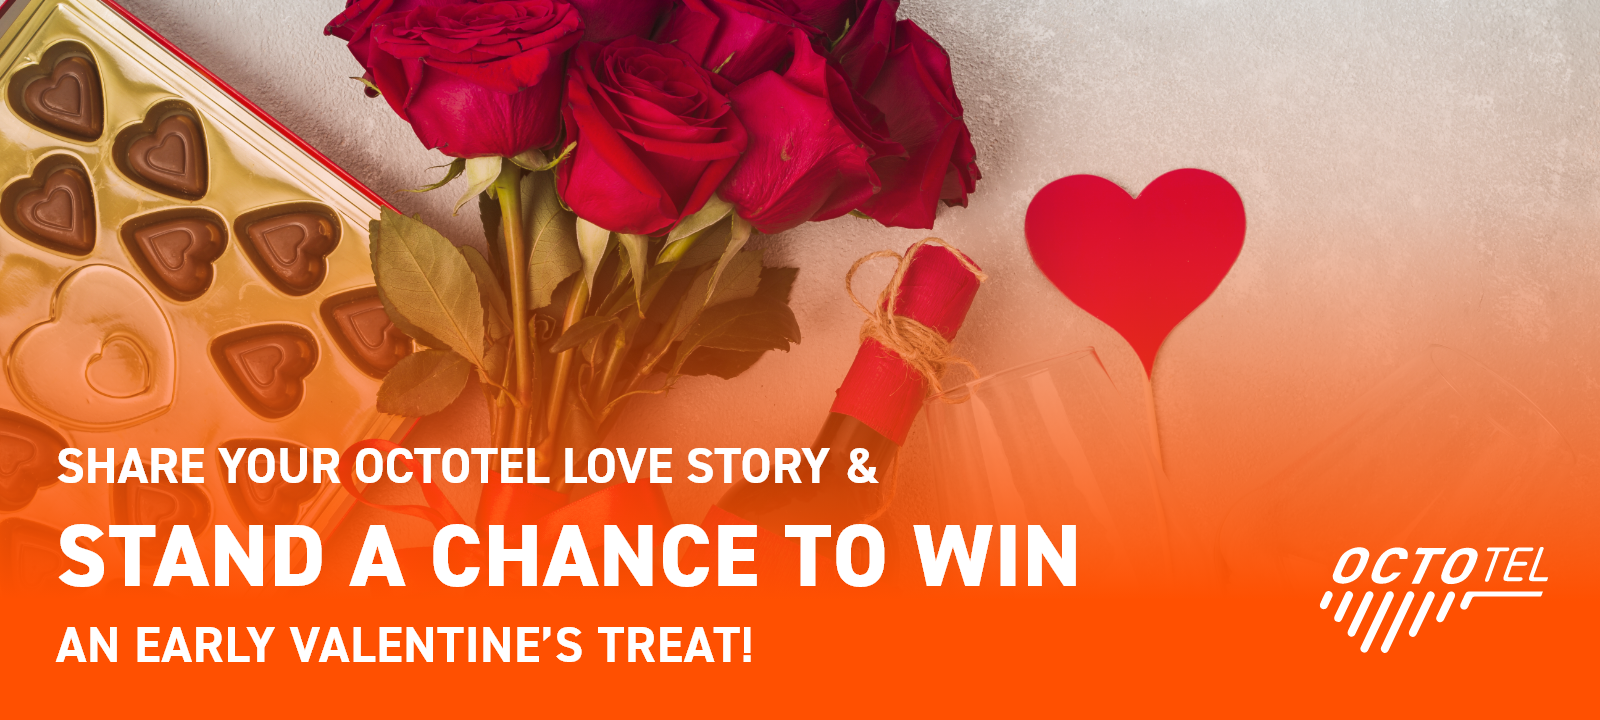 SHARE THE LOVE GIVEAWAY: WIN AN EARLY VALENTINE’S TREAT WITH OCTOTEL!